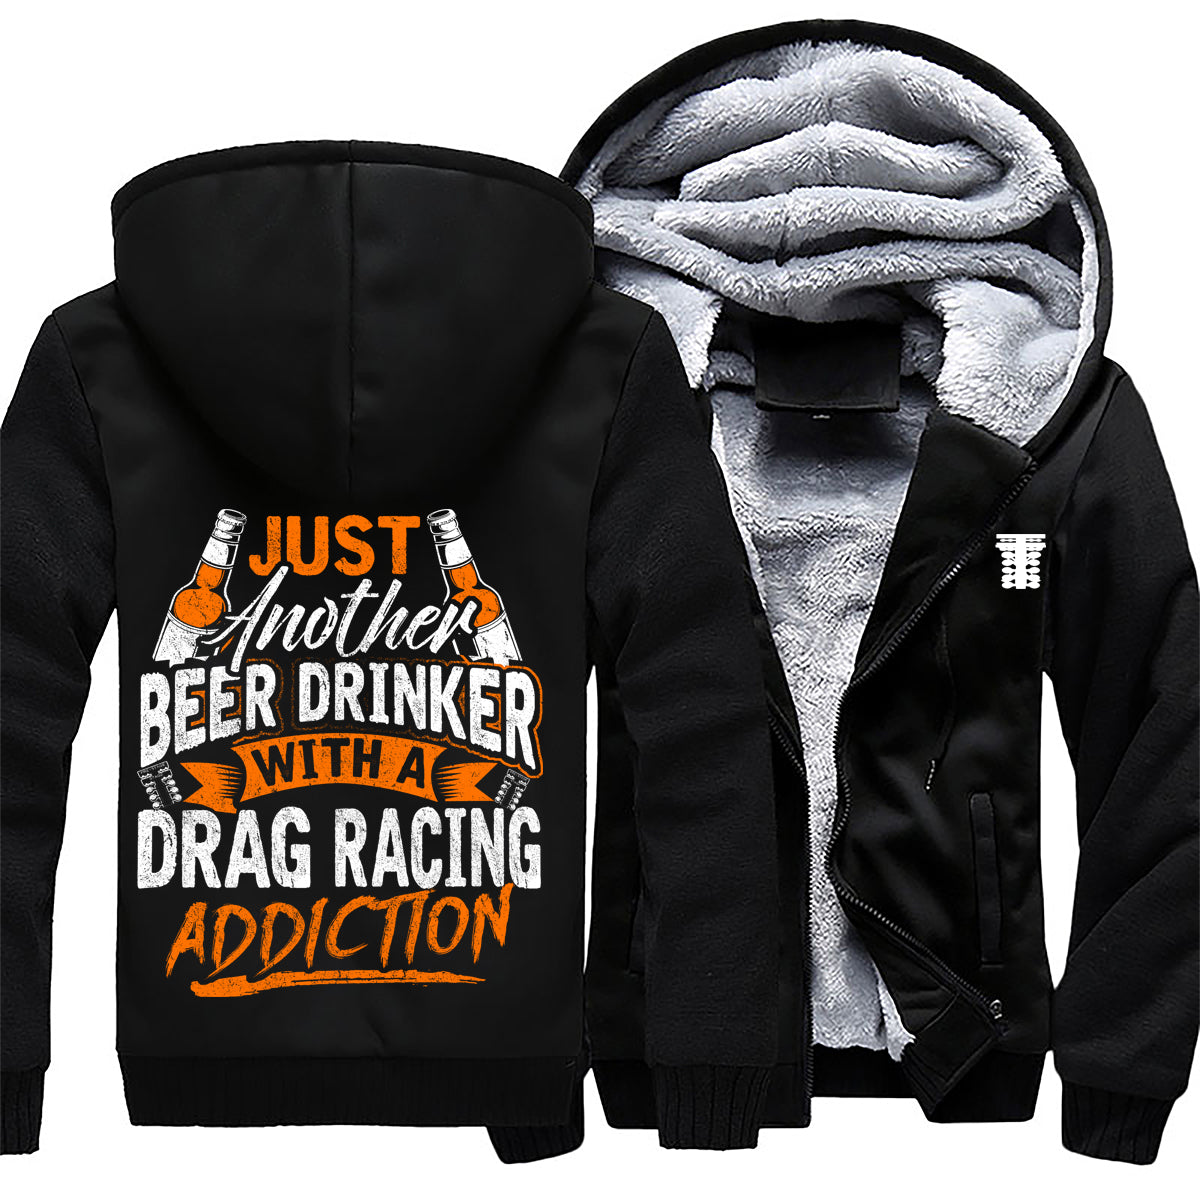 Just Another Beer Drinker With A Drag Racing Addiction Jacket 